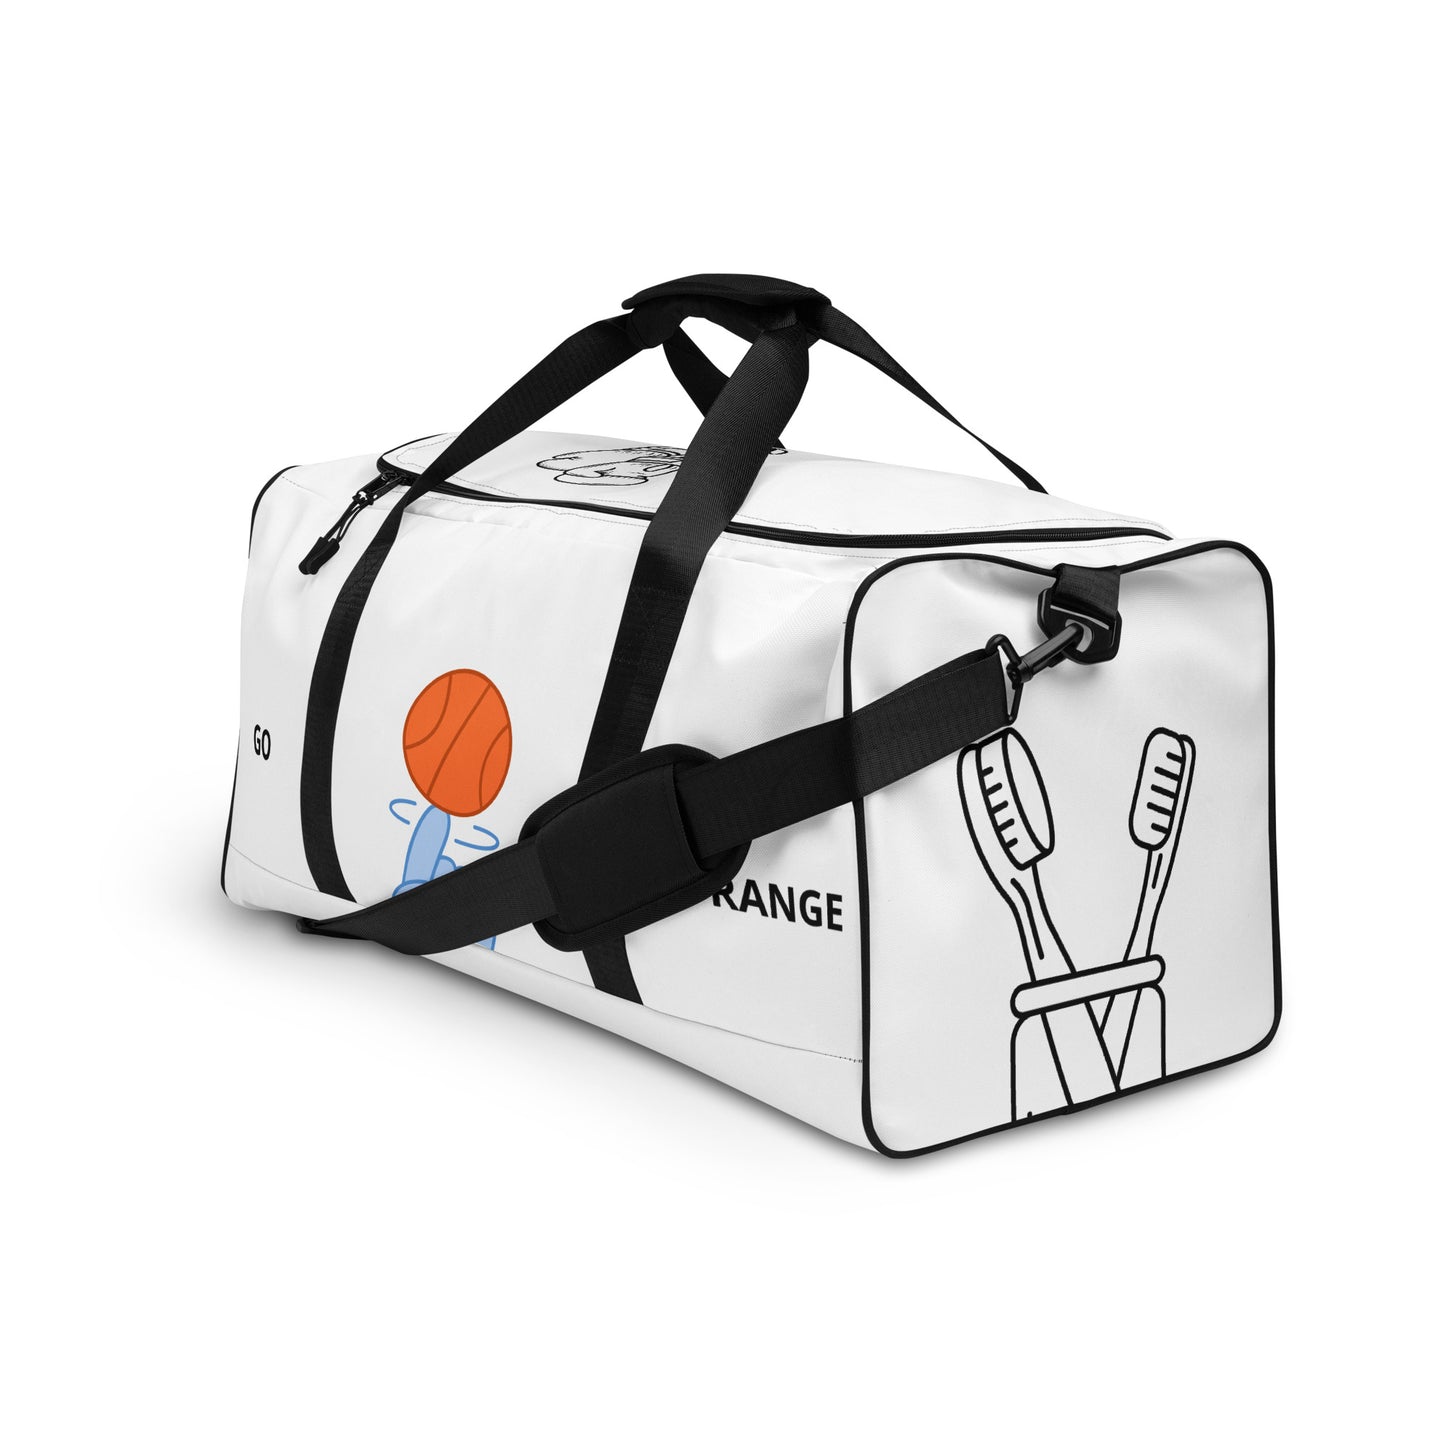 Graphics on the front of a duffle bag. Graphic is of a hand and a spinning basketball